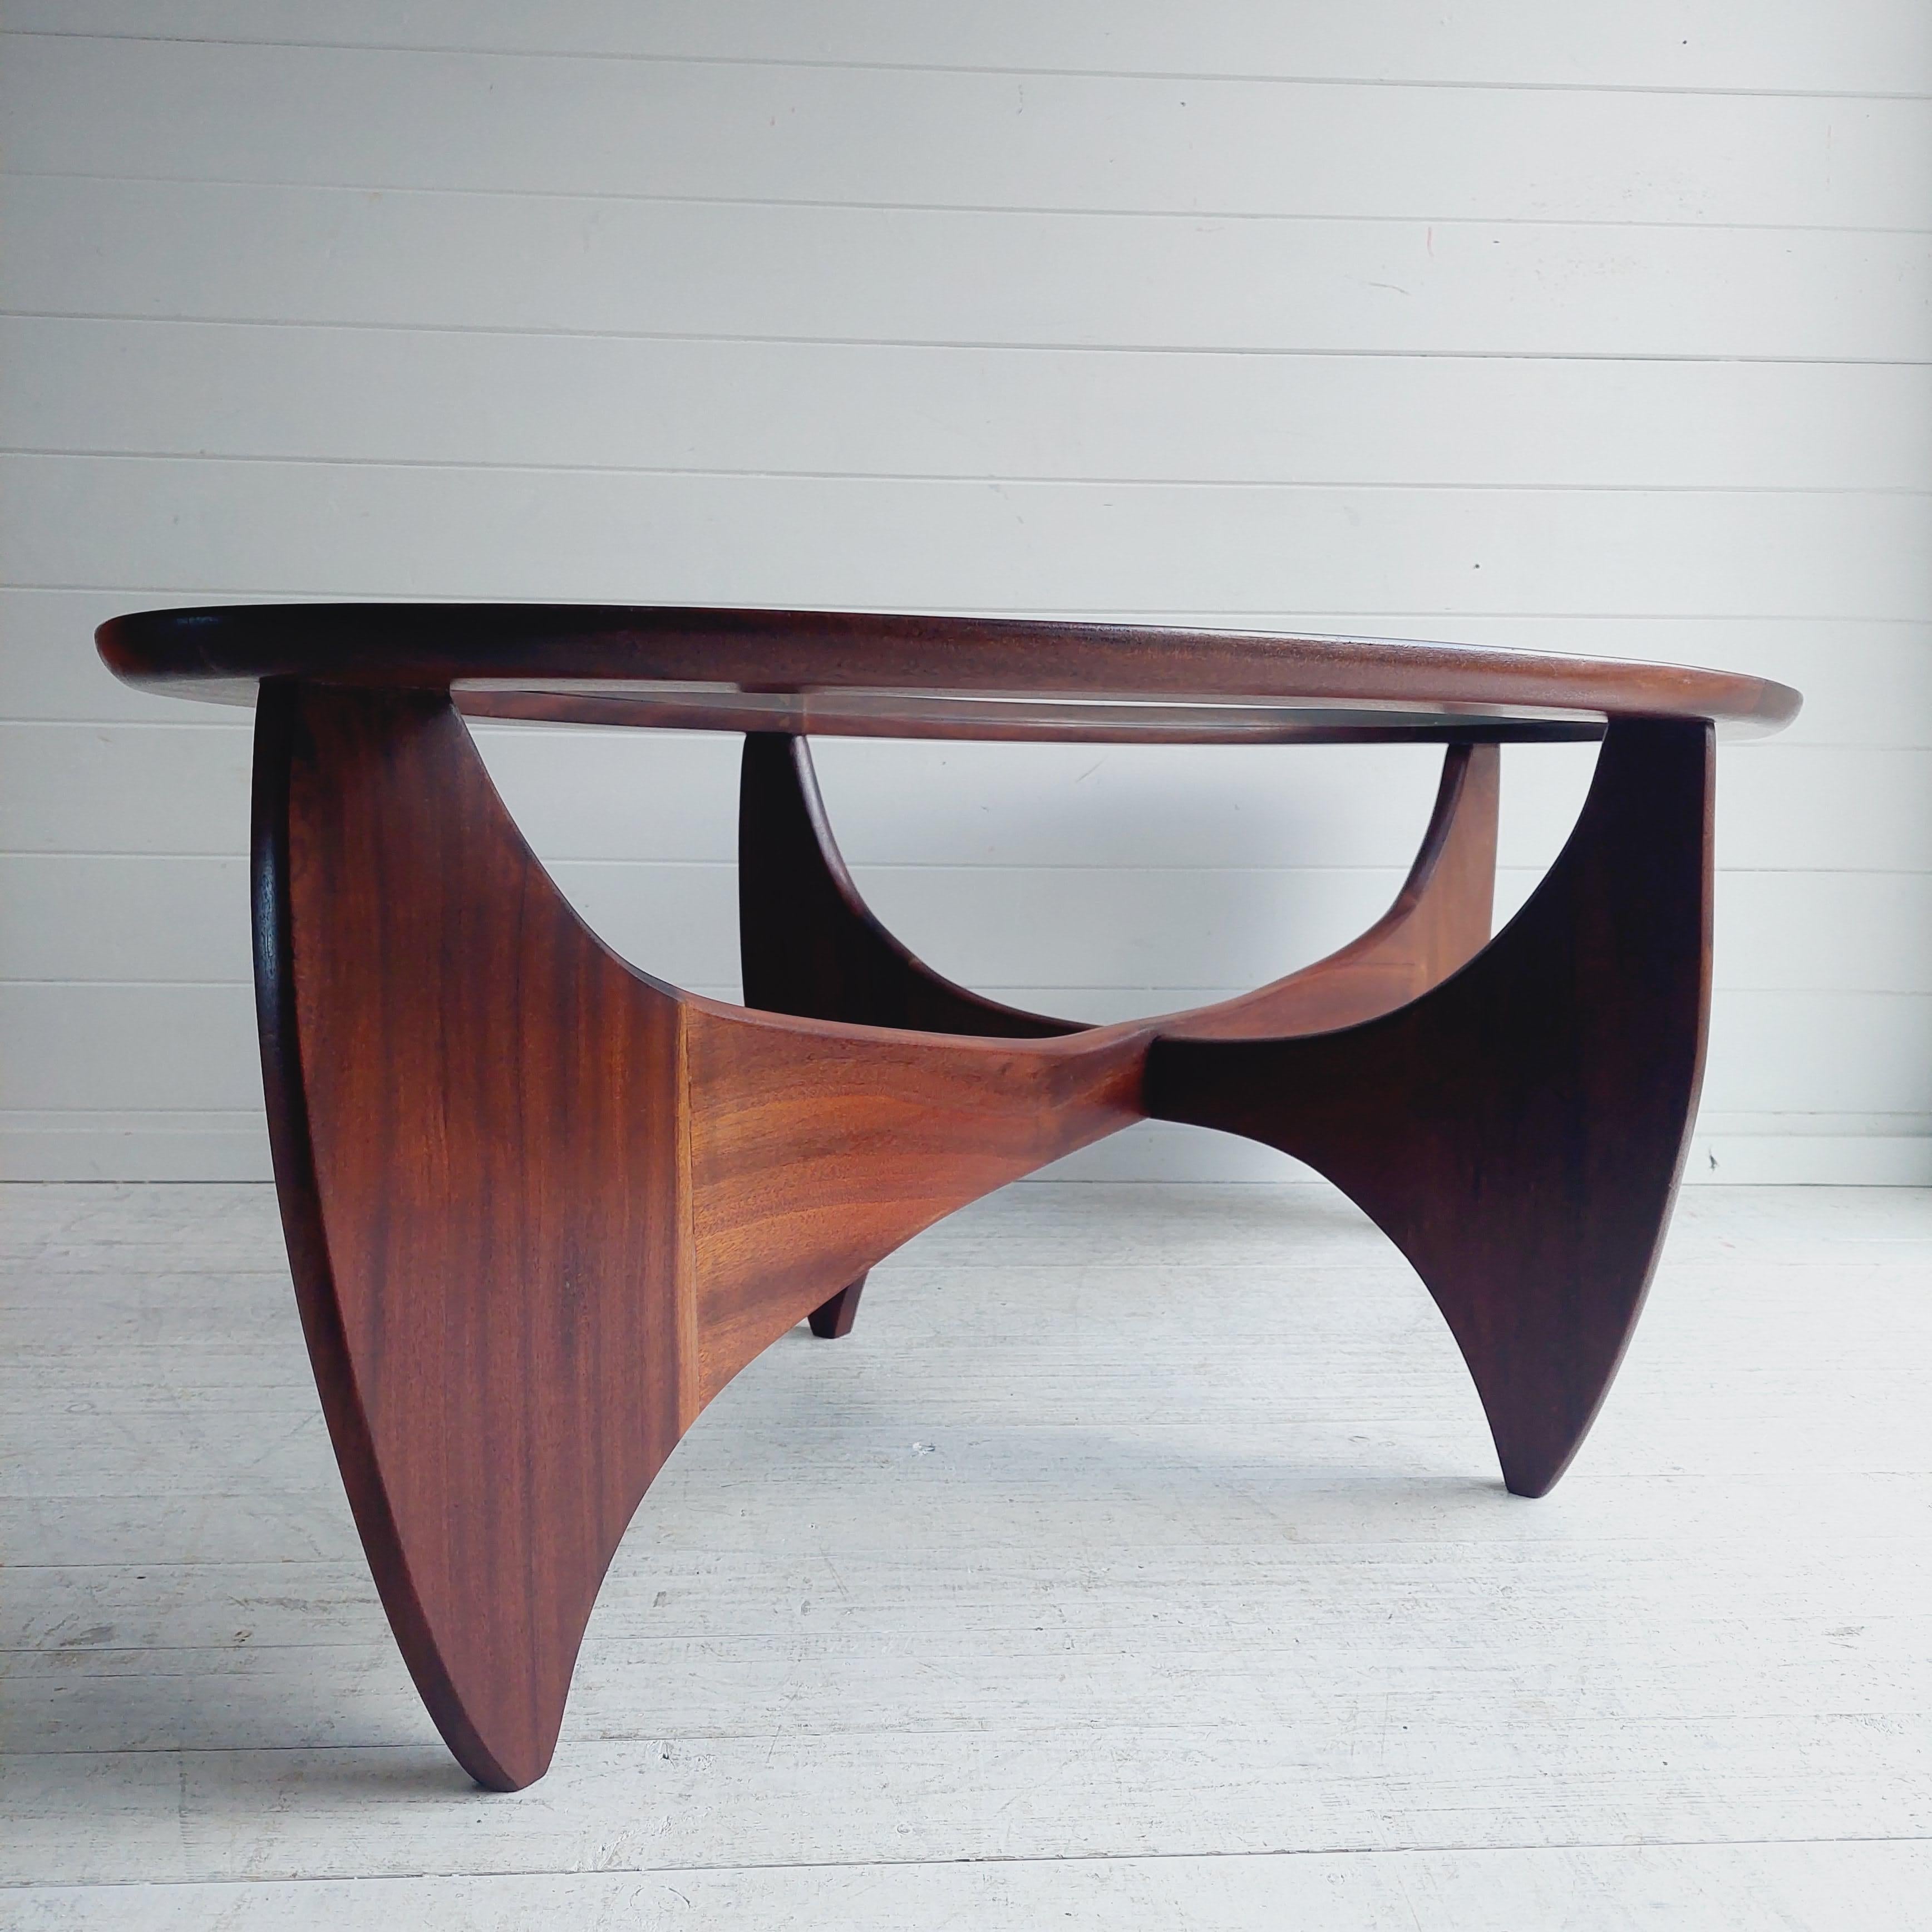 Mid century British teak and glass  Astro coffee table designed by Victor Wilkins for G Plan in the 1960s / 70s.

This restored piece is the oval shape which is harder to find.
This piece has a solid teak base (inspired by Isamu Noguchi ) complete